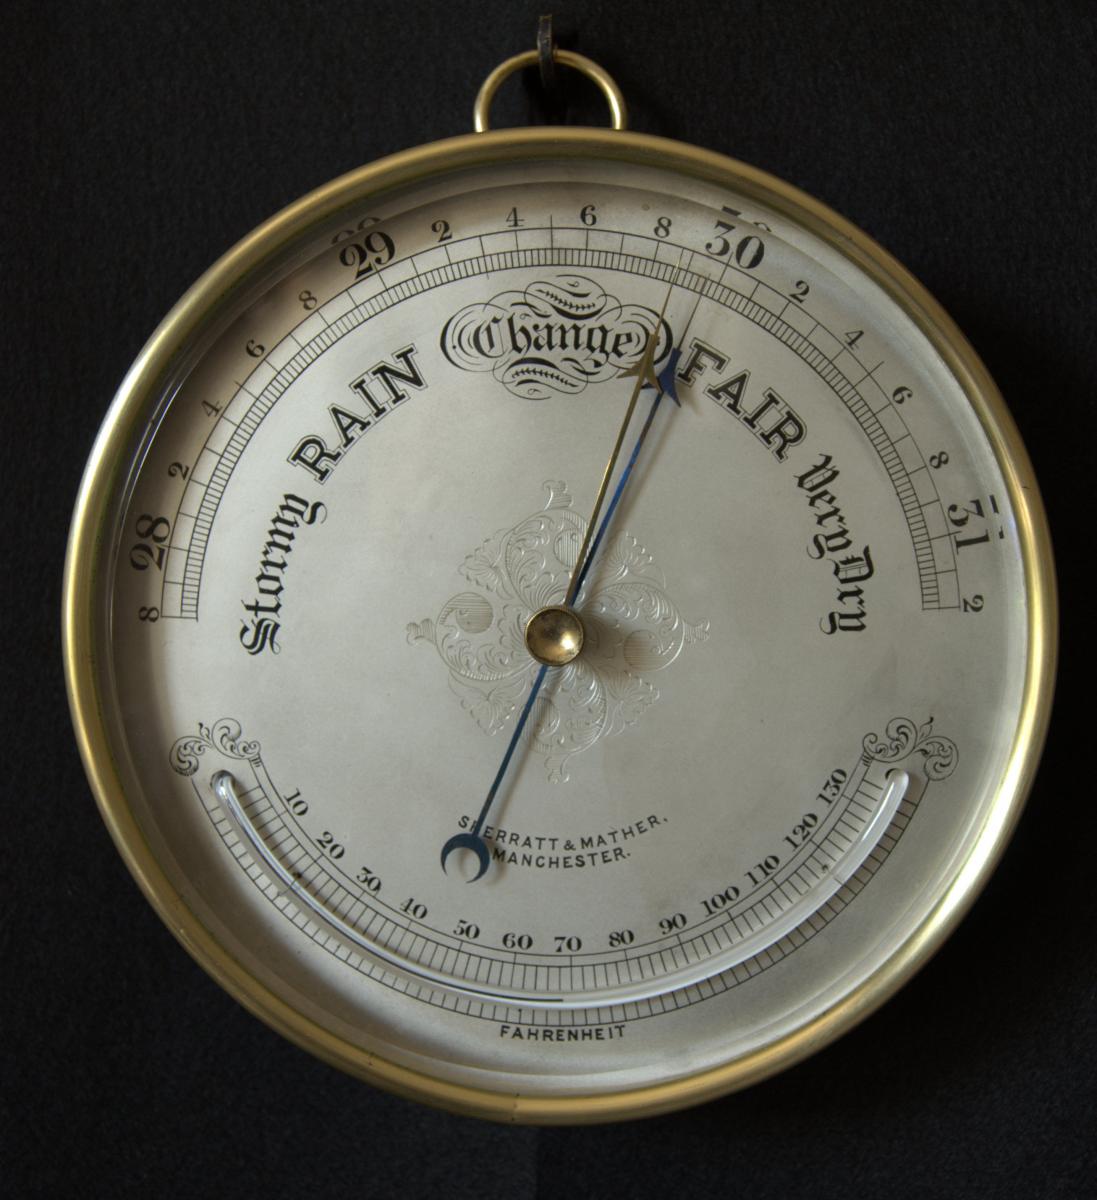 Sherratt & Mather - Manchester. Fine quality and unusual 8-inch [210 mm] diameter brass cased aneroid barometer.